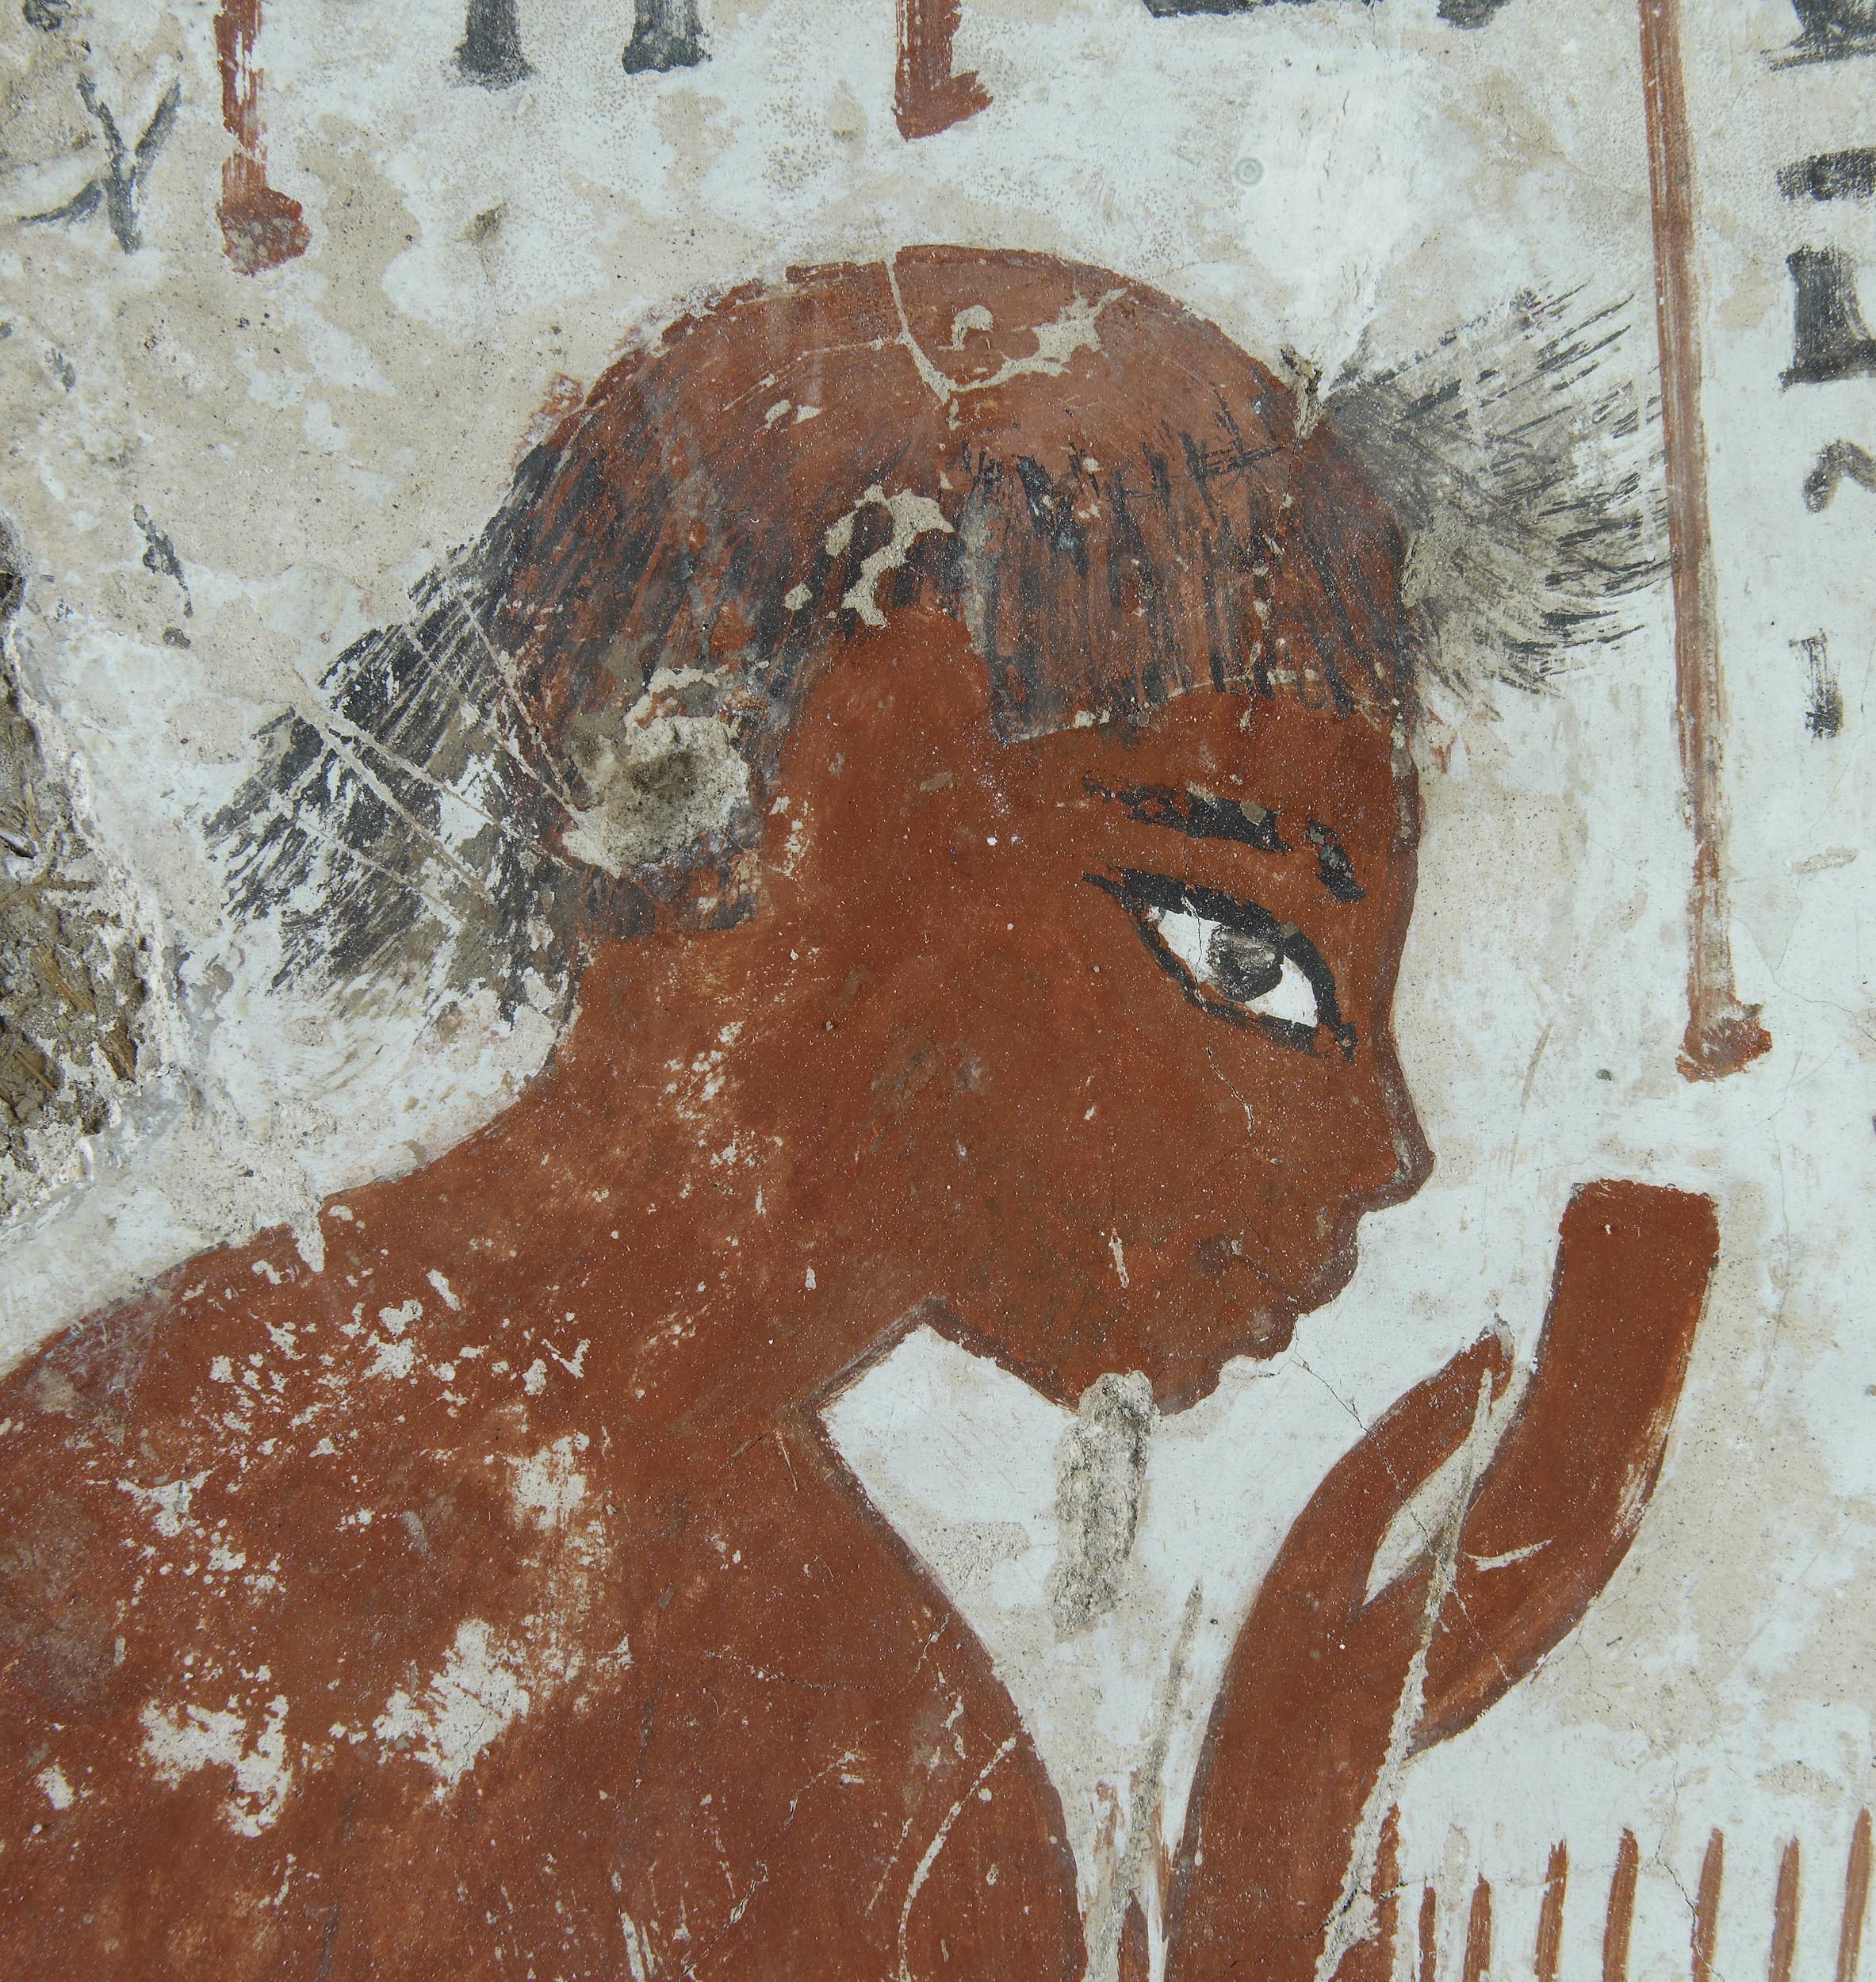 Paintings from the Tomb-chapel of Nebamun (article)